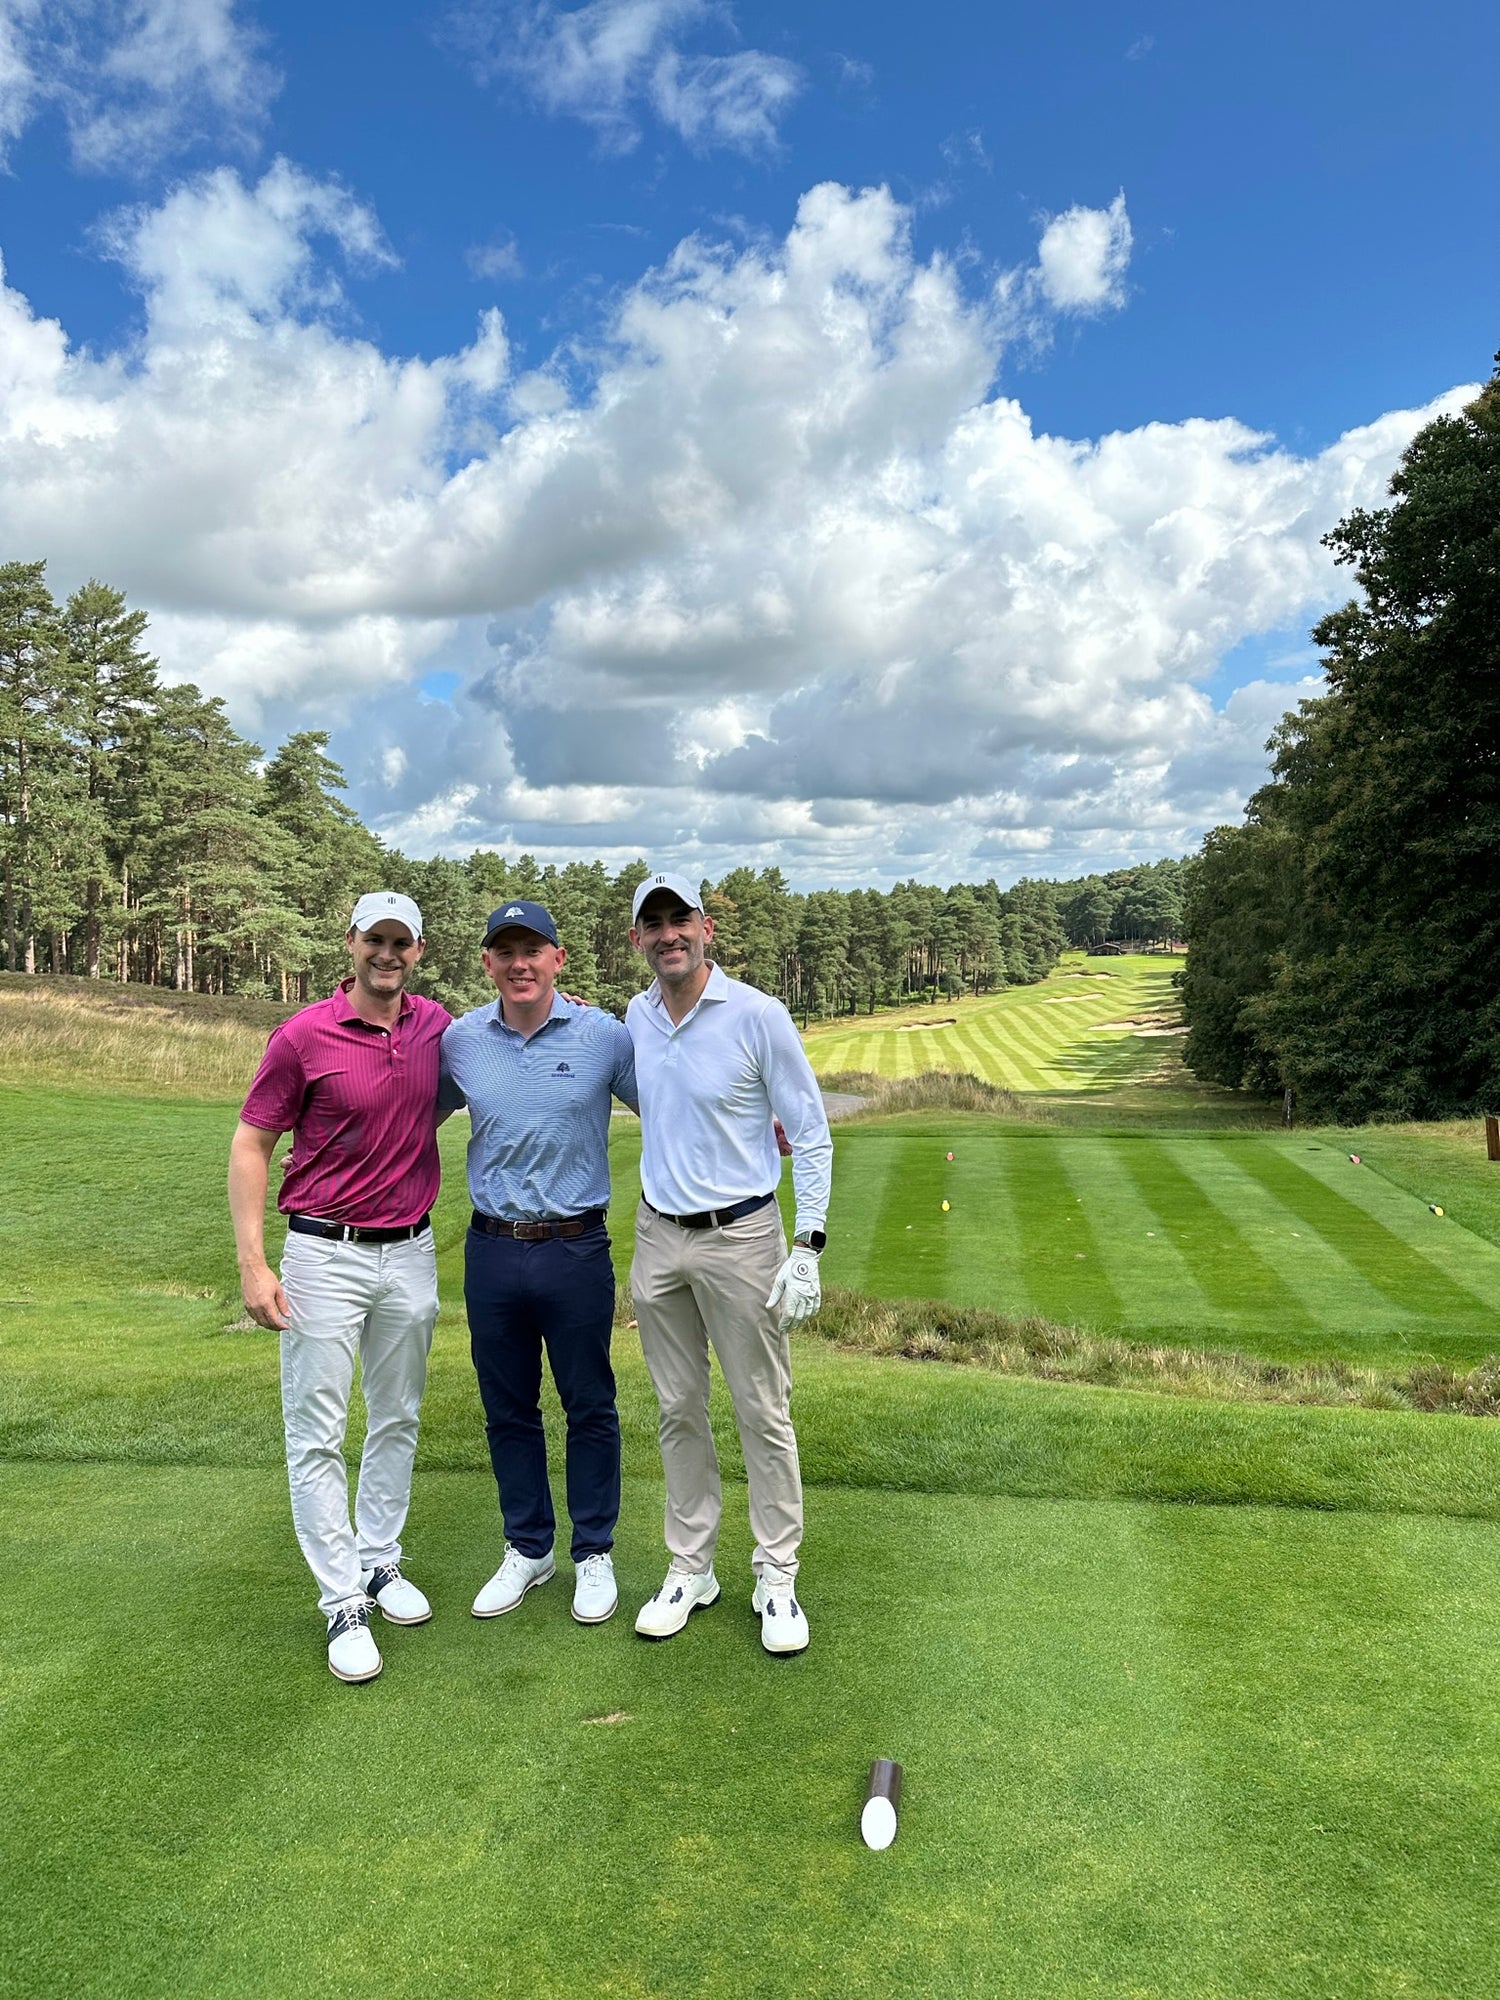 In Good Company with Sunningdale Golf Club's Director of Golf Christian Foreman